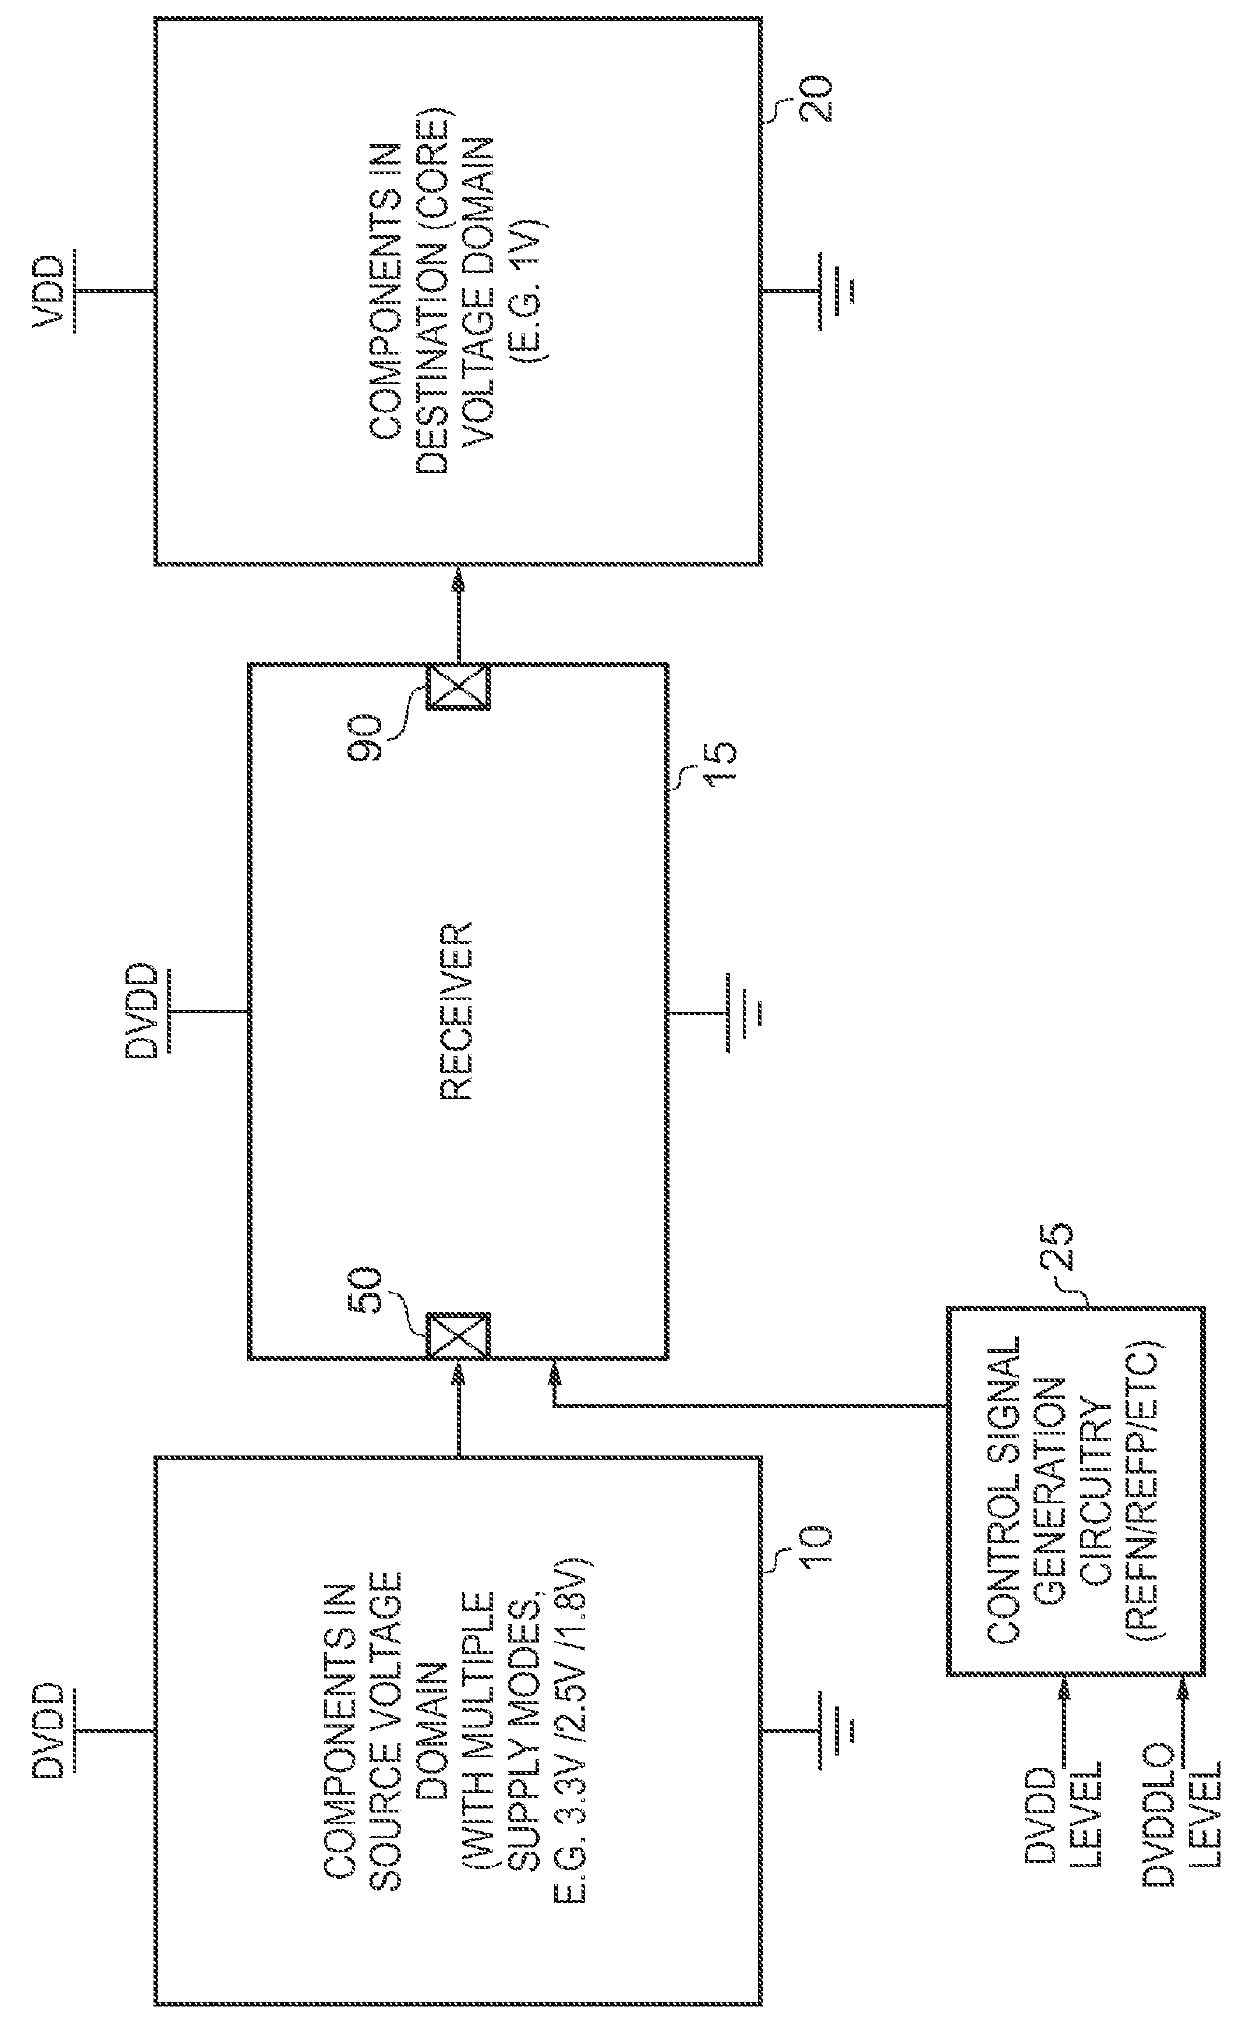 Receiver Circuitry and Method for Converting an Input Signal From a Source Voltage Domain Into an Output Signal for a Destination Voltage Domain